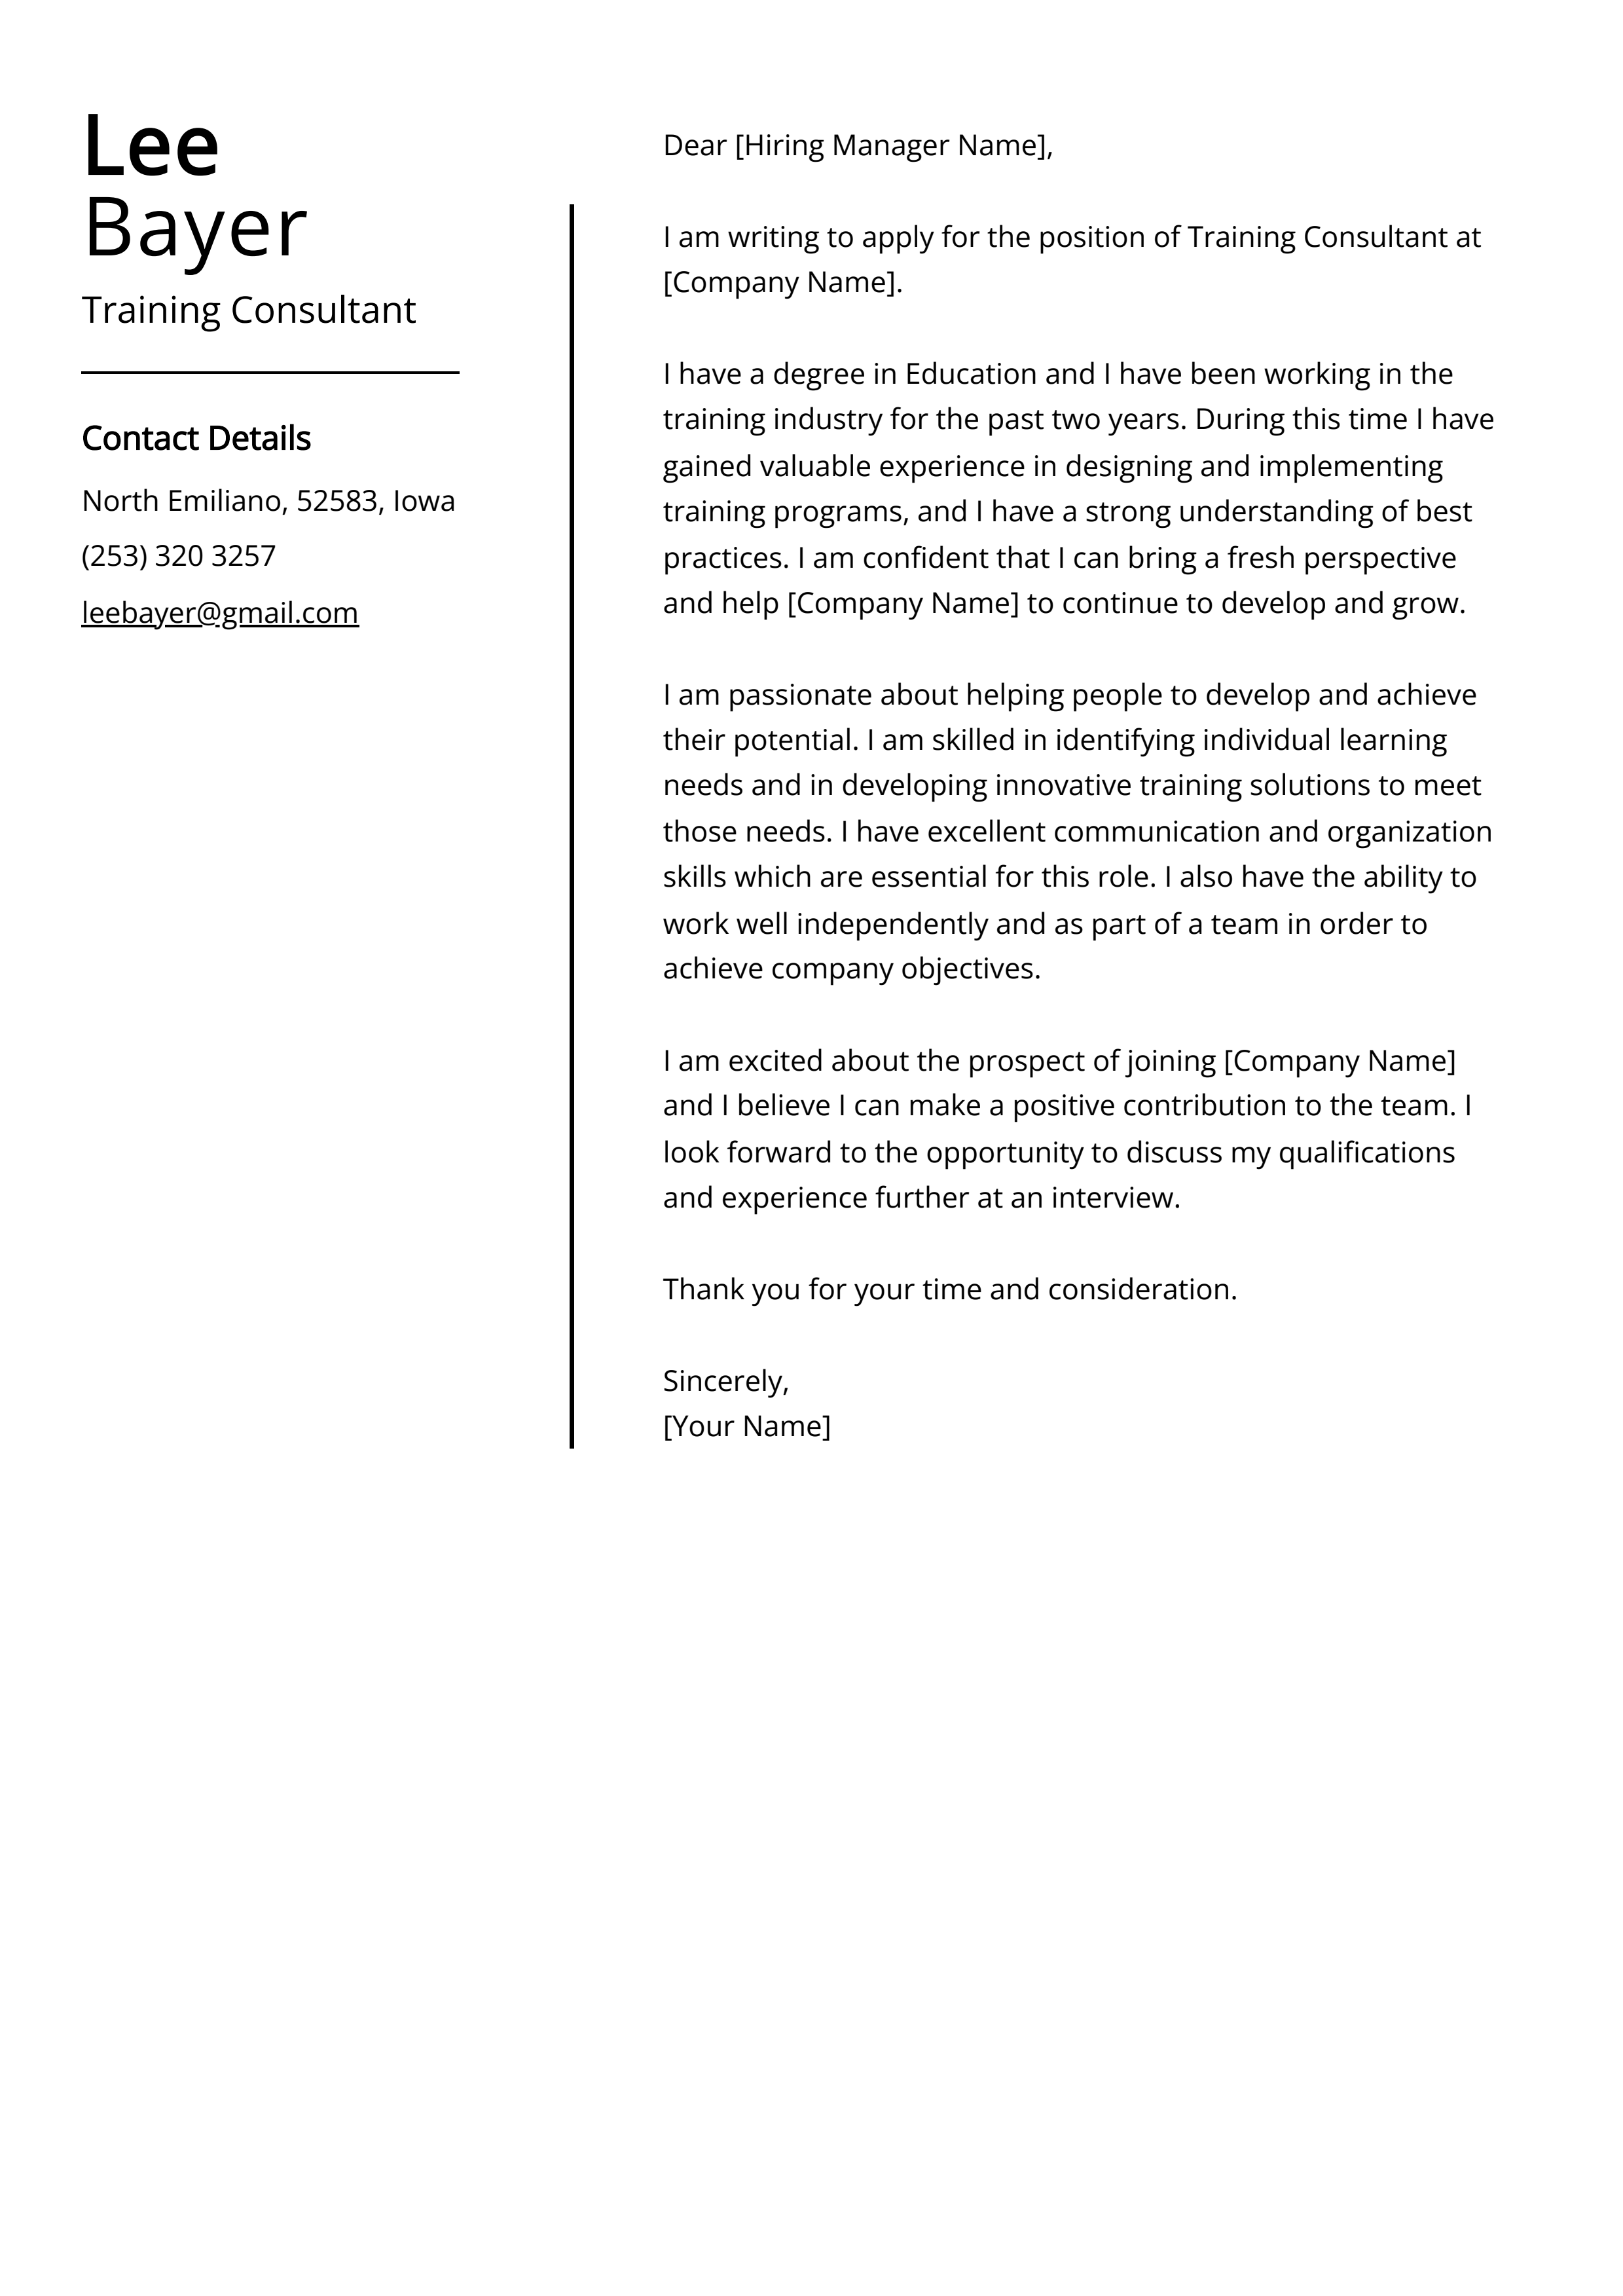 Training Consultant Cover Letter Example